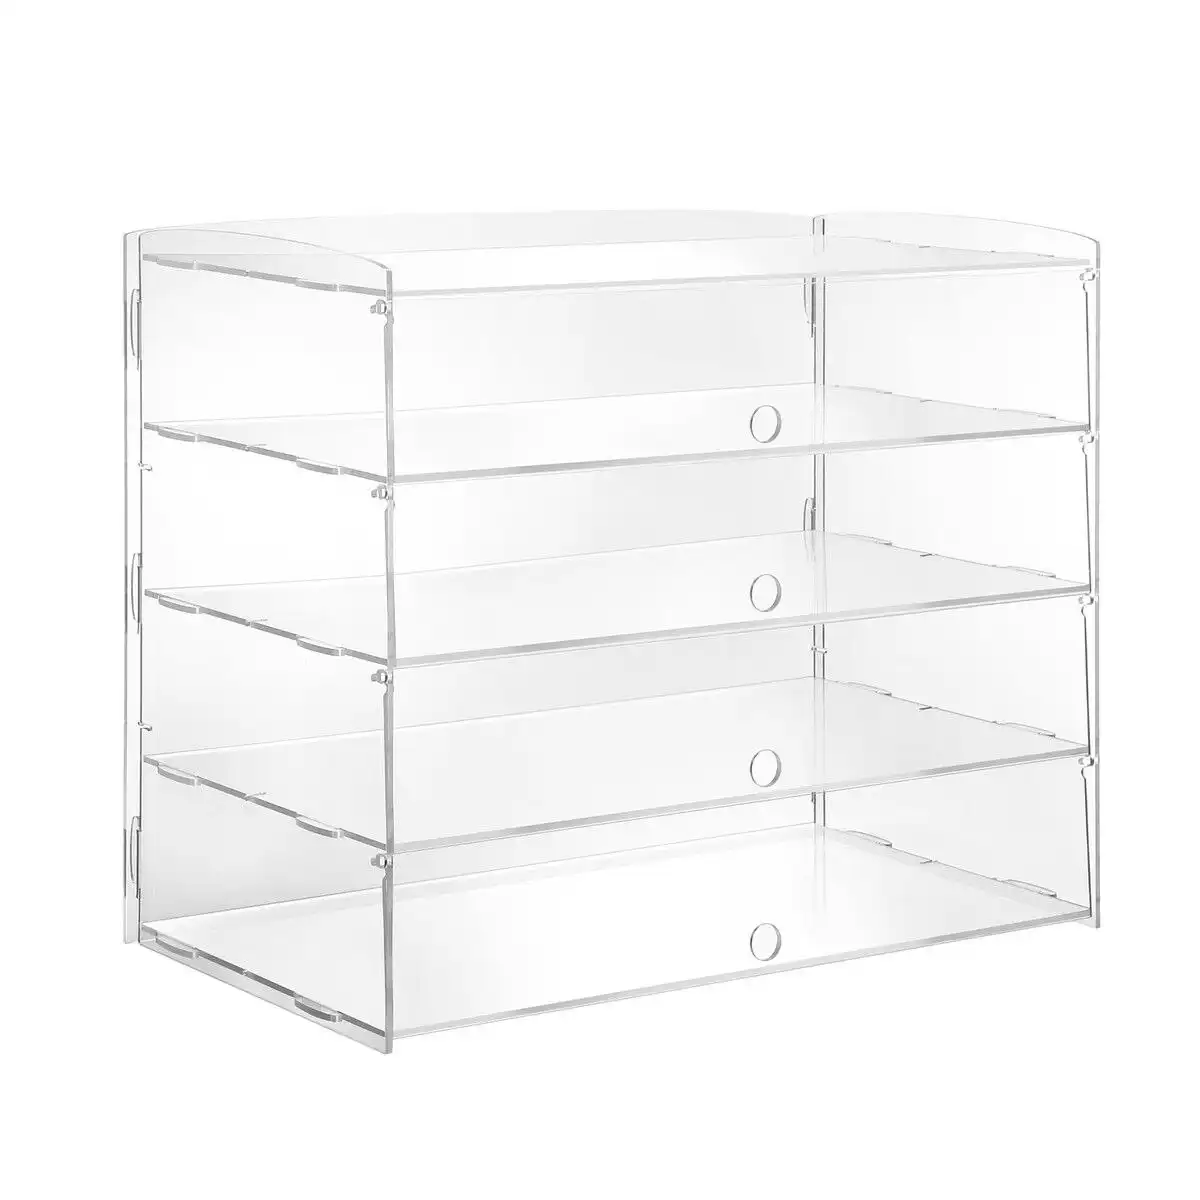 Ausway Cupcake Display Cabinet Acrylic Cake Bakery Shelf Unit Case 4 Tier Stand Model Donut Pastry Toy Showcase 5mm Thick Transparent